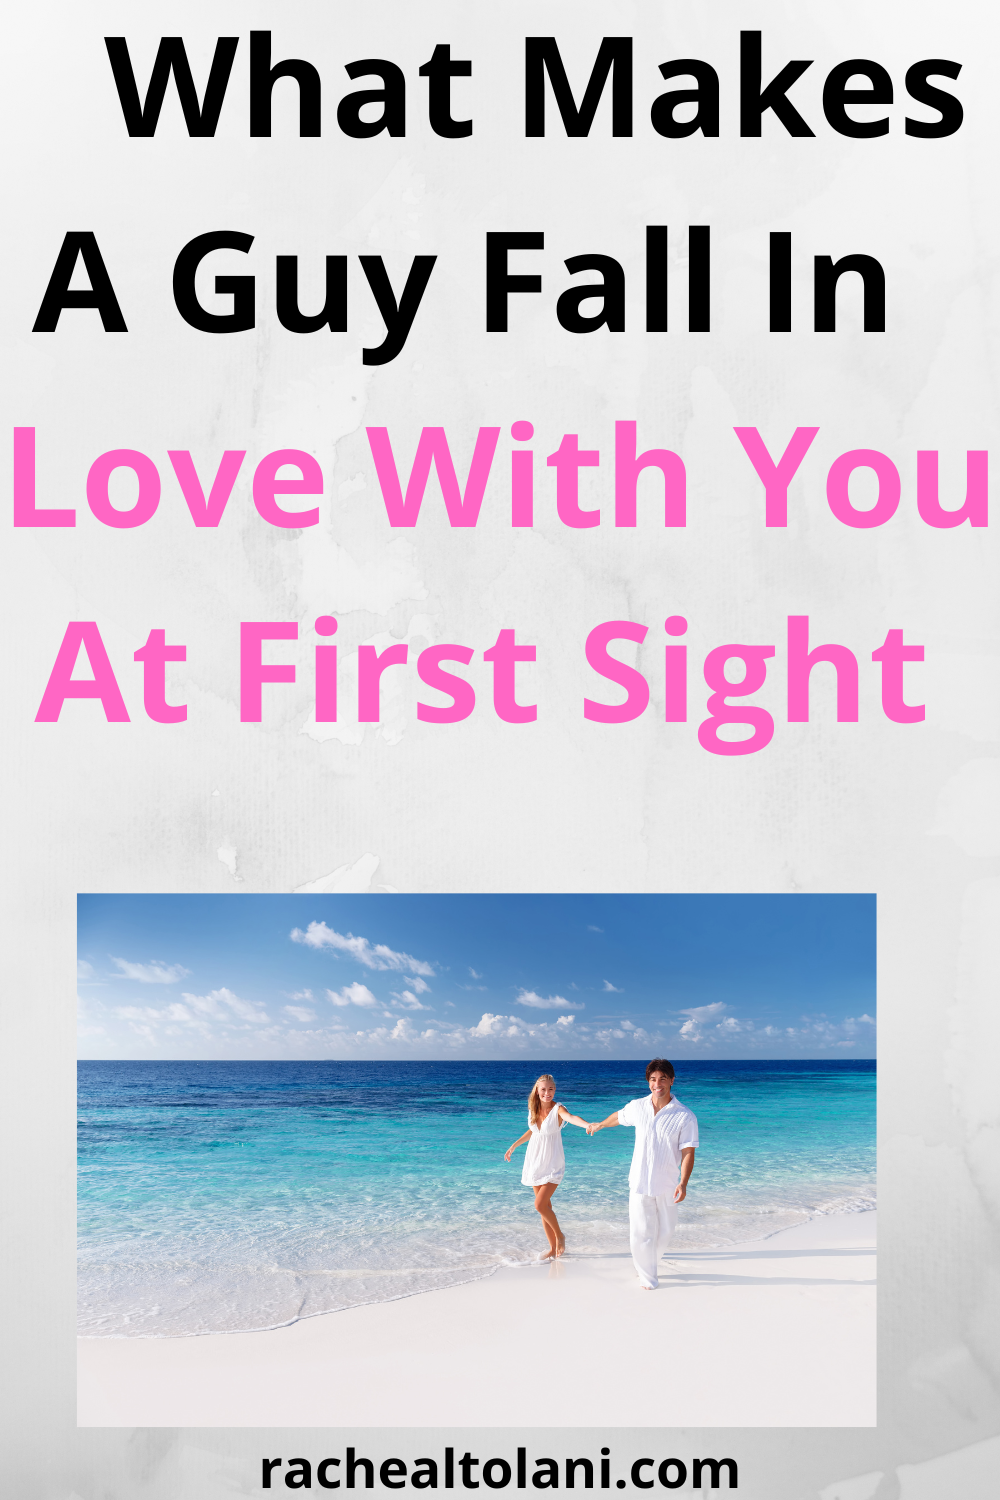 Things That Make A Guy Fall In Love At First Sight